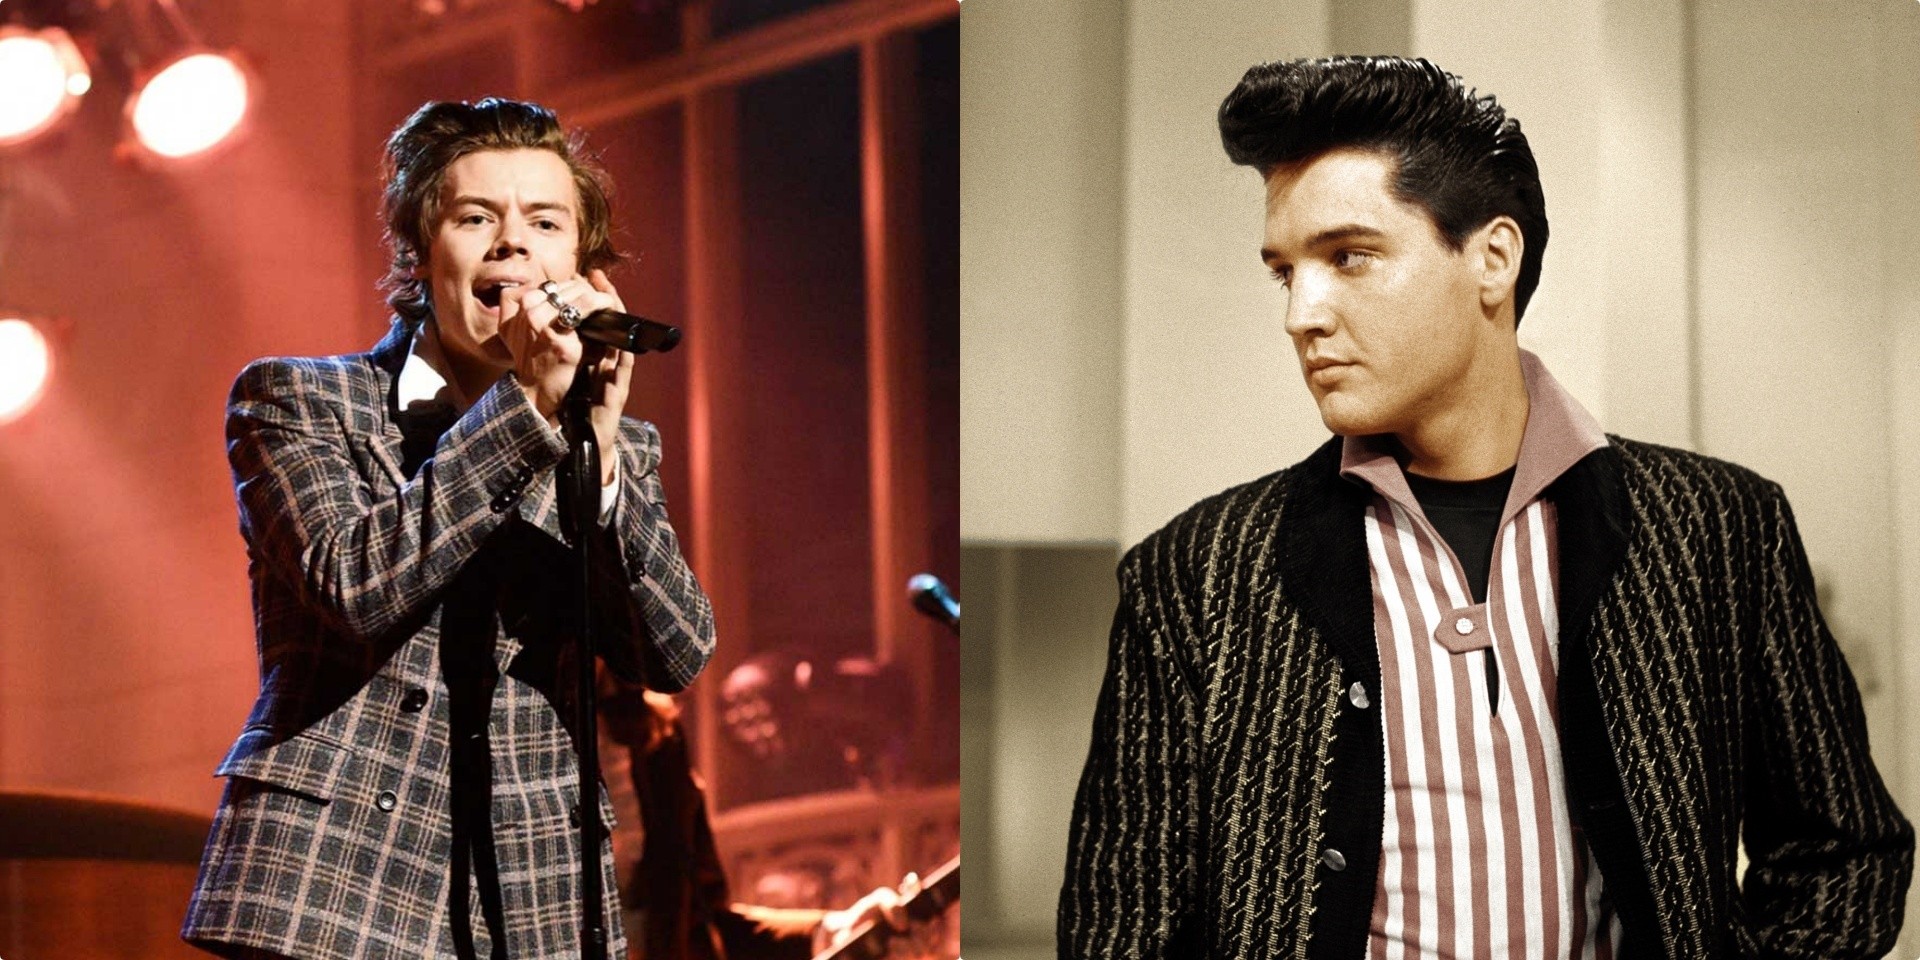 Harry Styles in the running to play Elvis Presley in Baz Luhrmann biopic